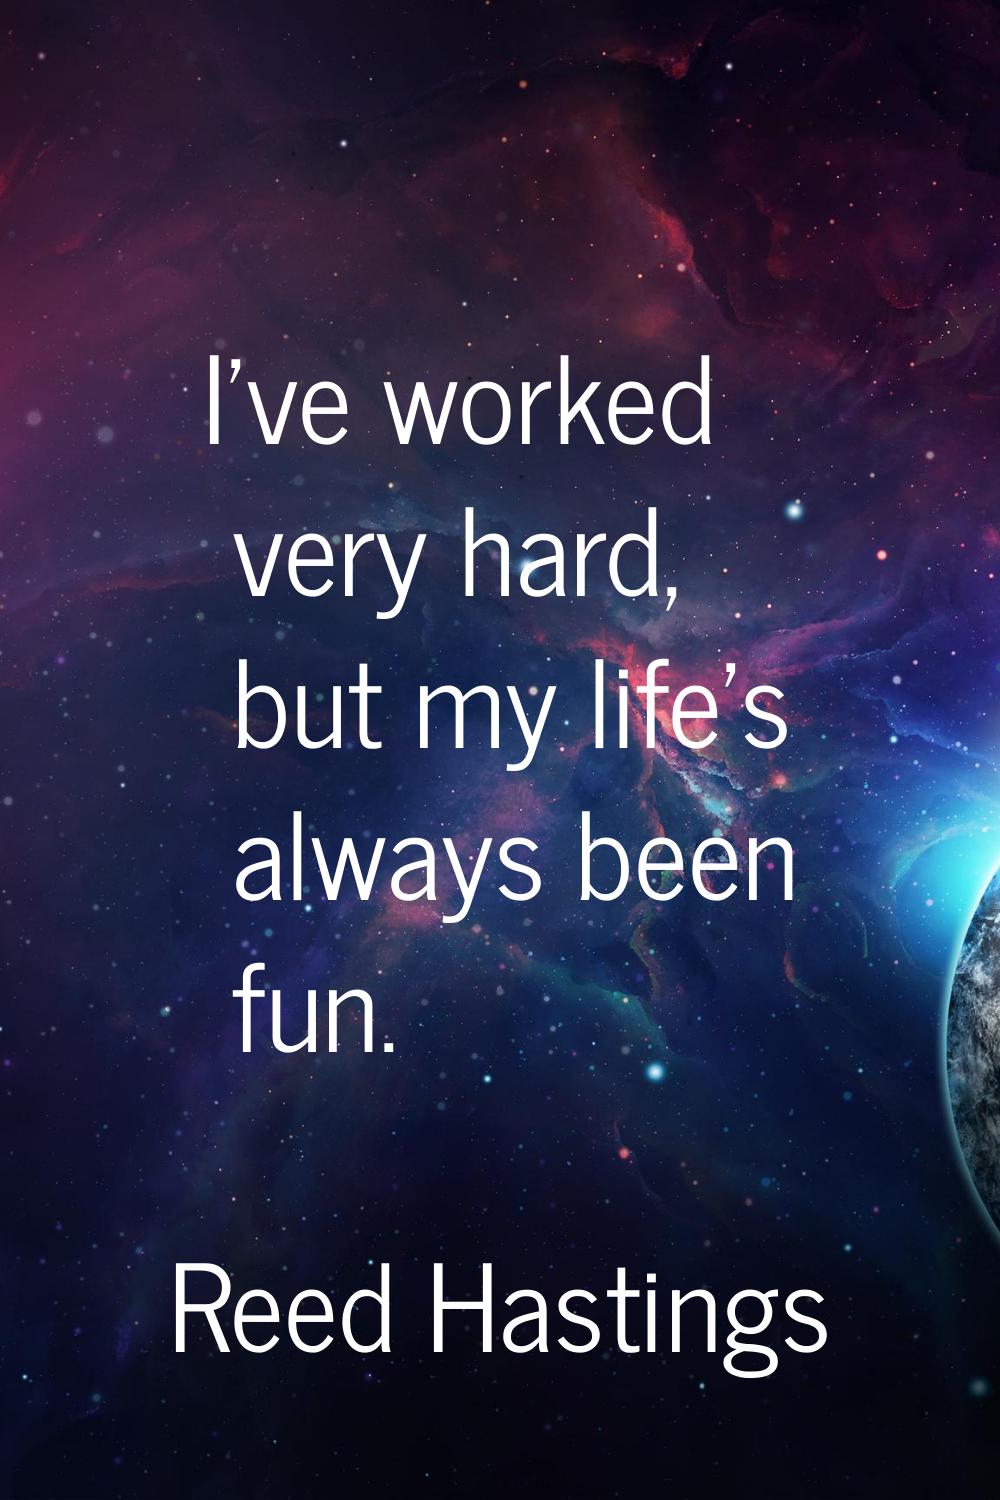 I've worked very hard, but my life's always been fun.